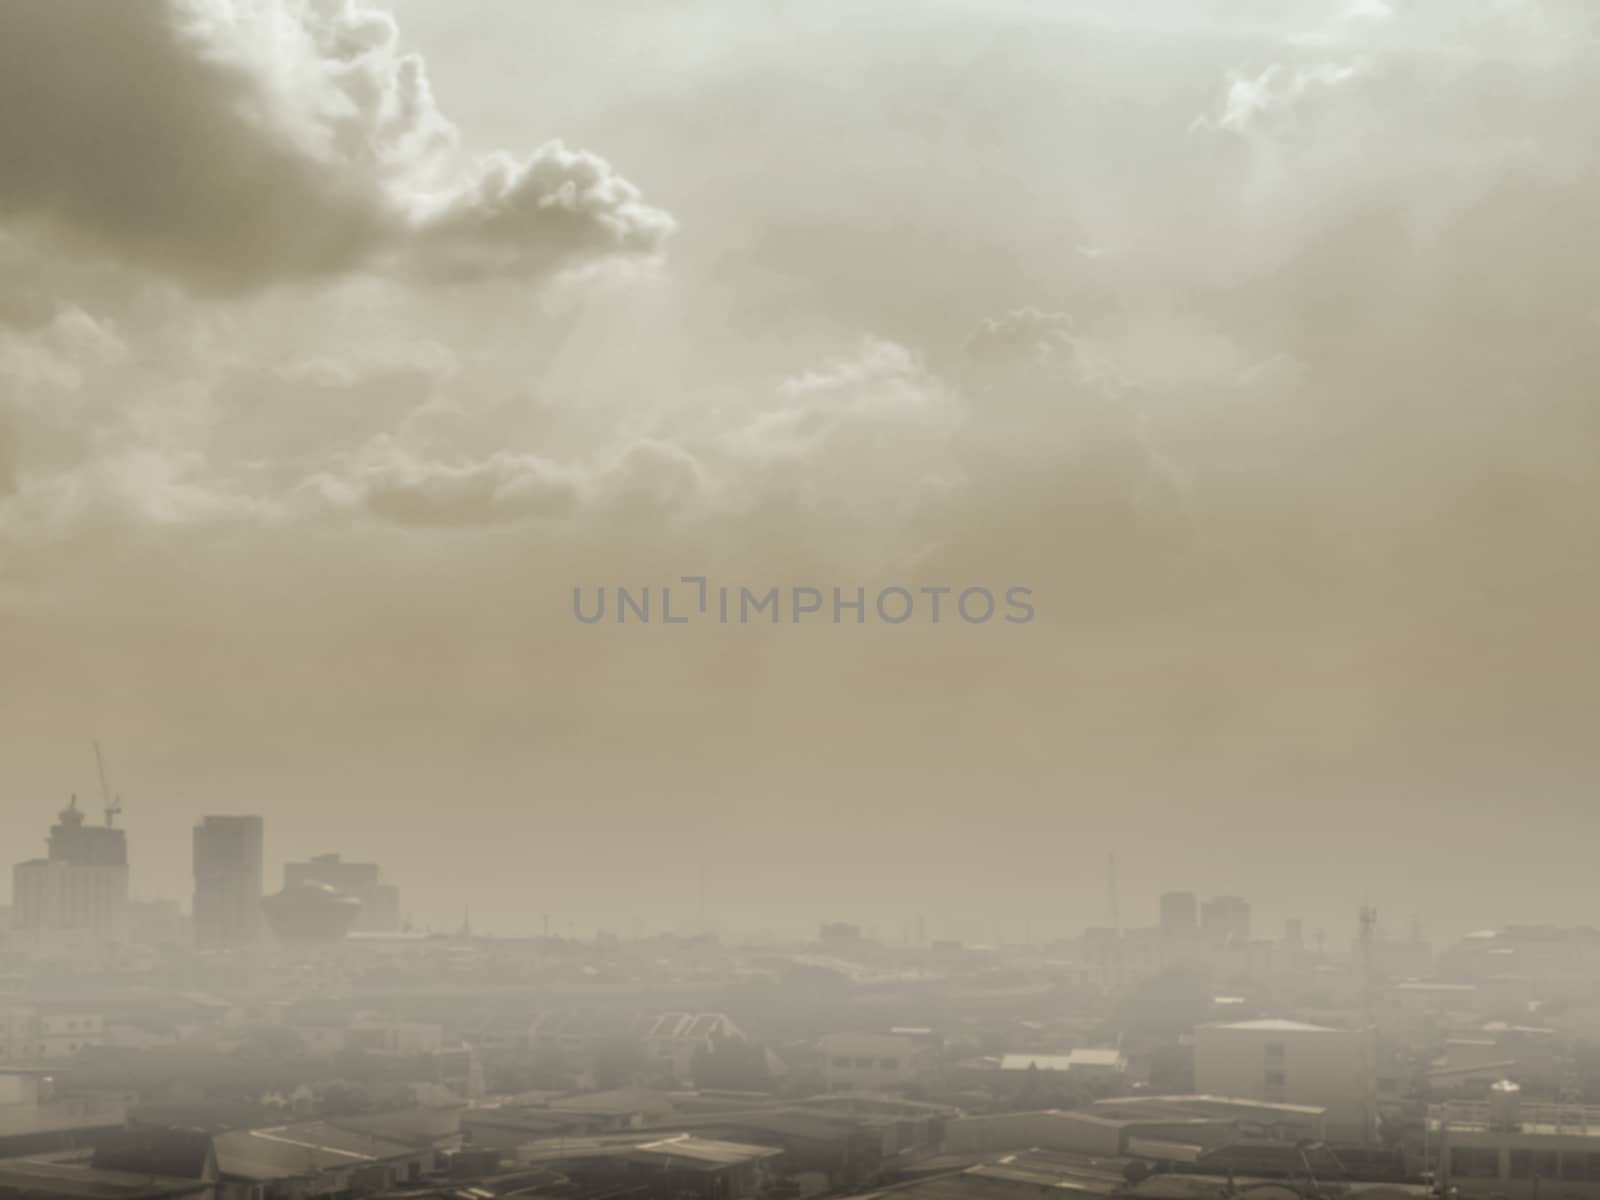 Blurred background of PM2.5 smog in the city bangkok thailand by Myimagine